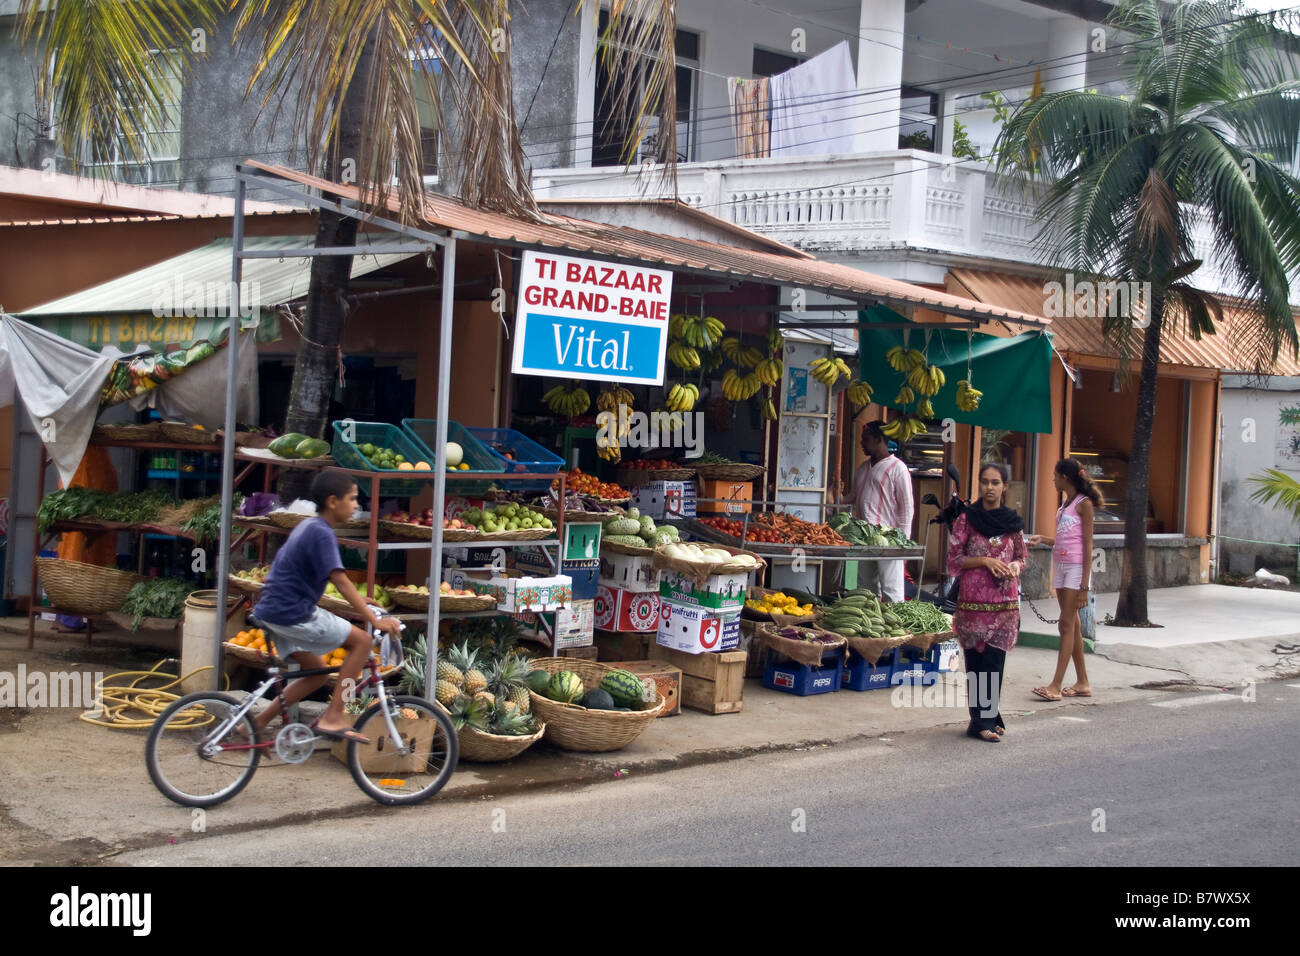 Friut and vegetable store at main street in Grand Baie Mauritius Africa Stock Photo